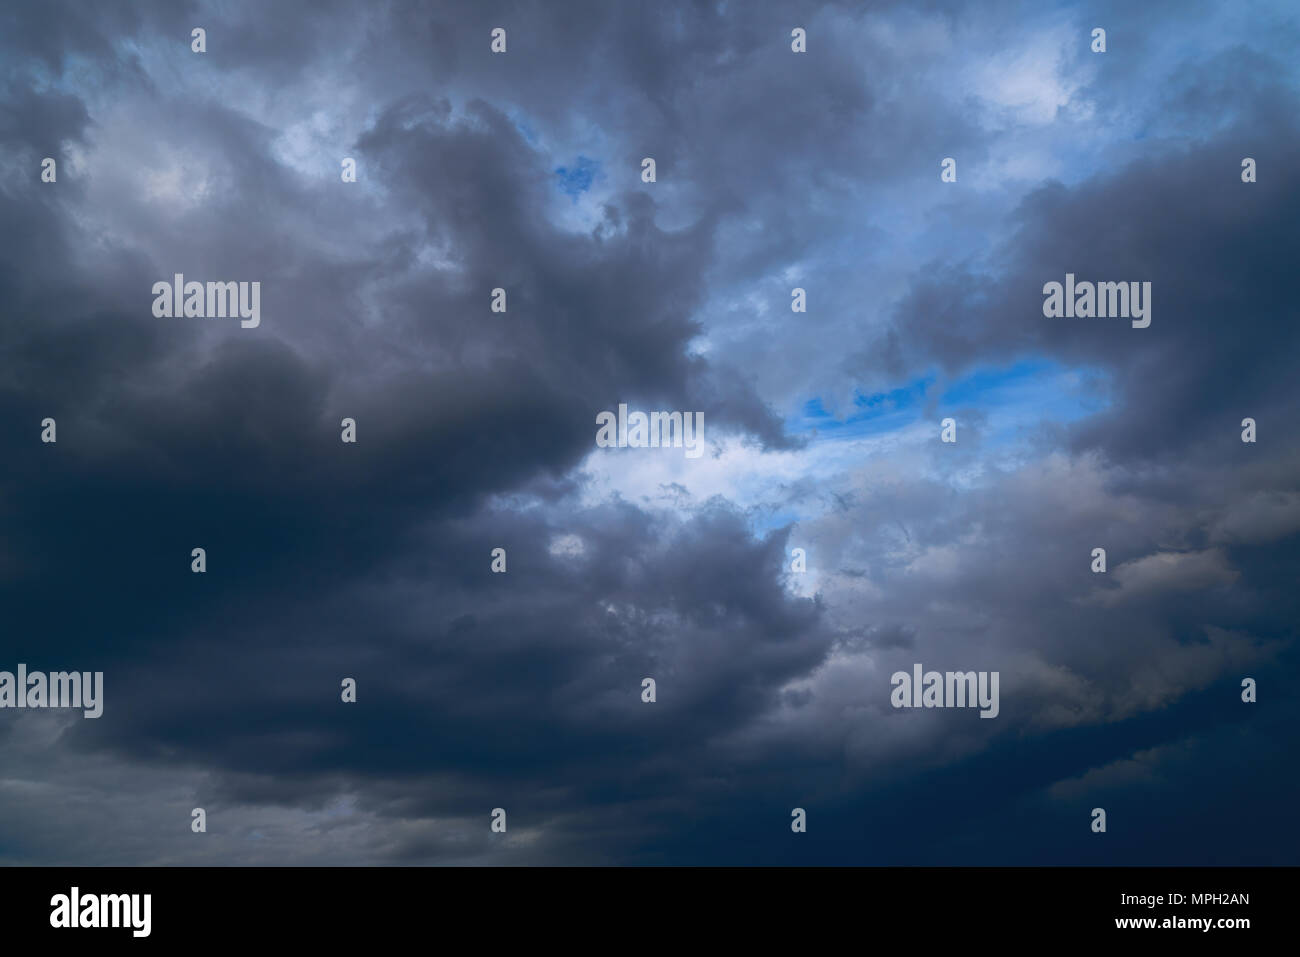 Dramatic clouds of stormy sky in a stormy weather day Stock Photo